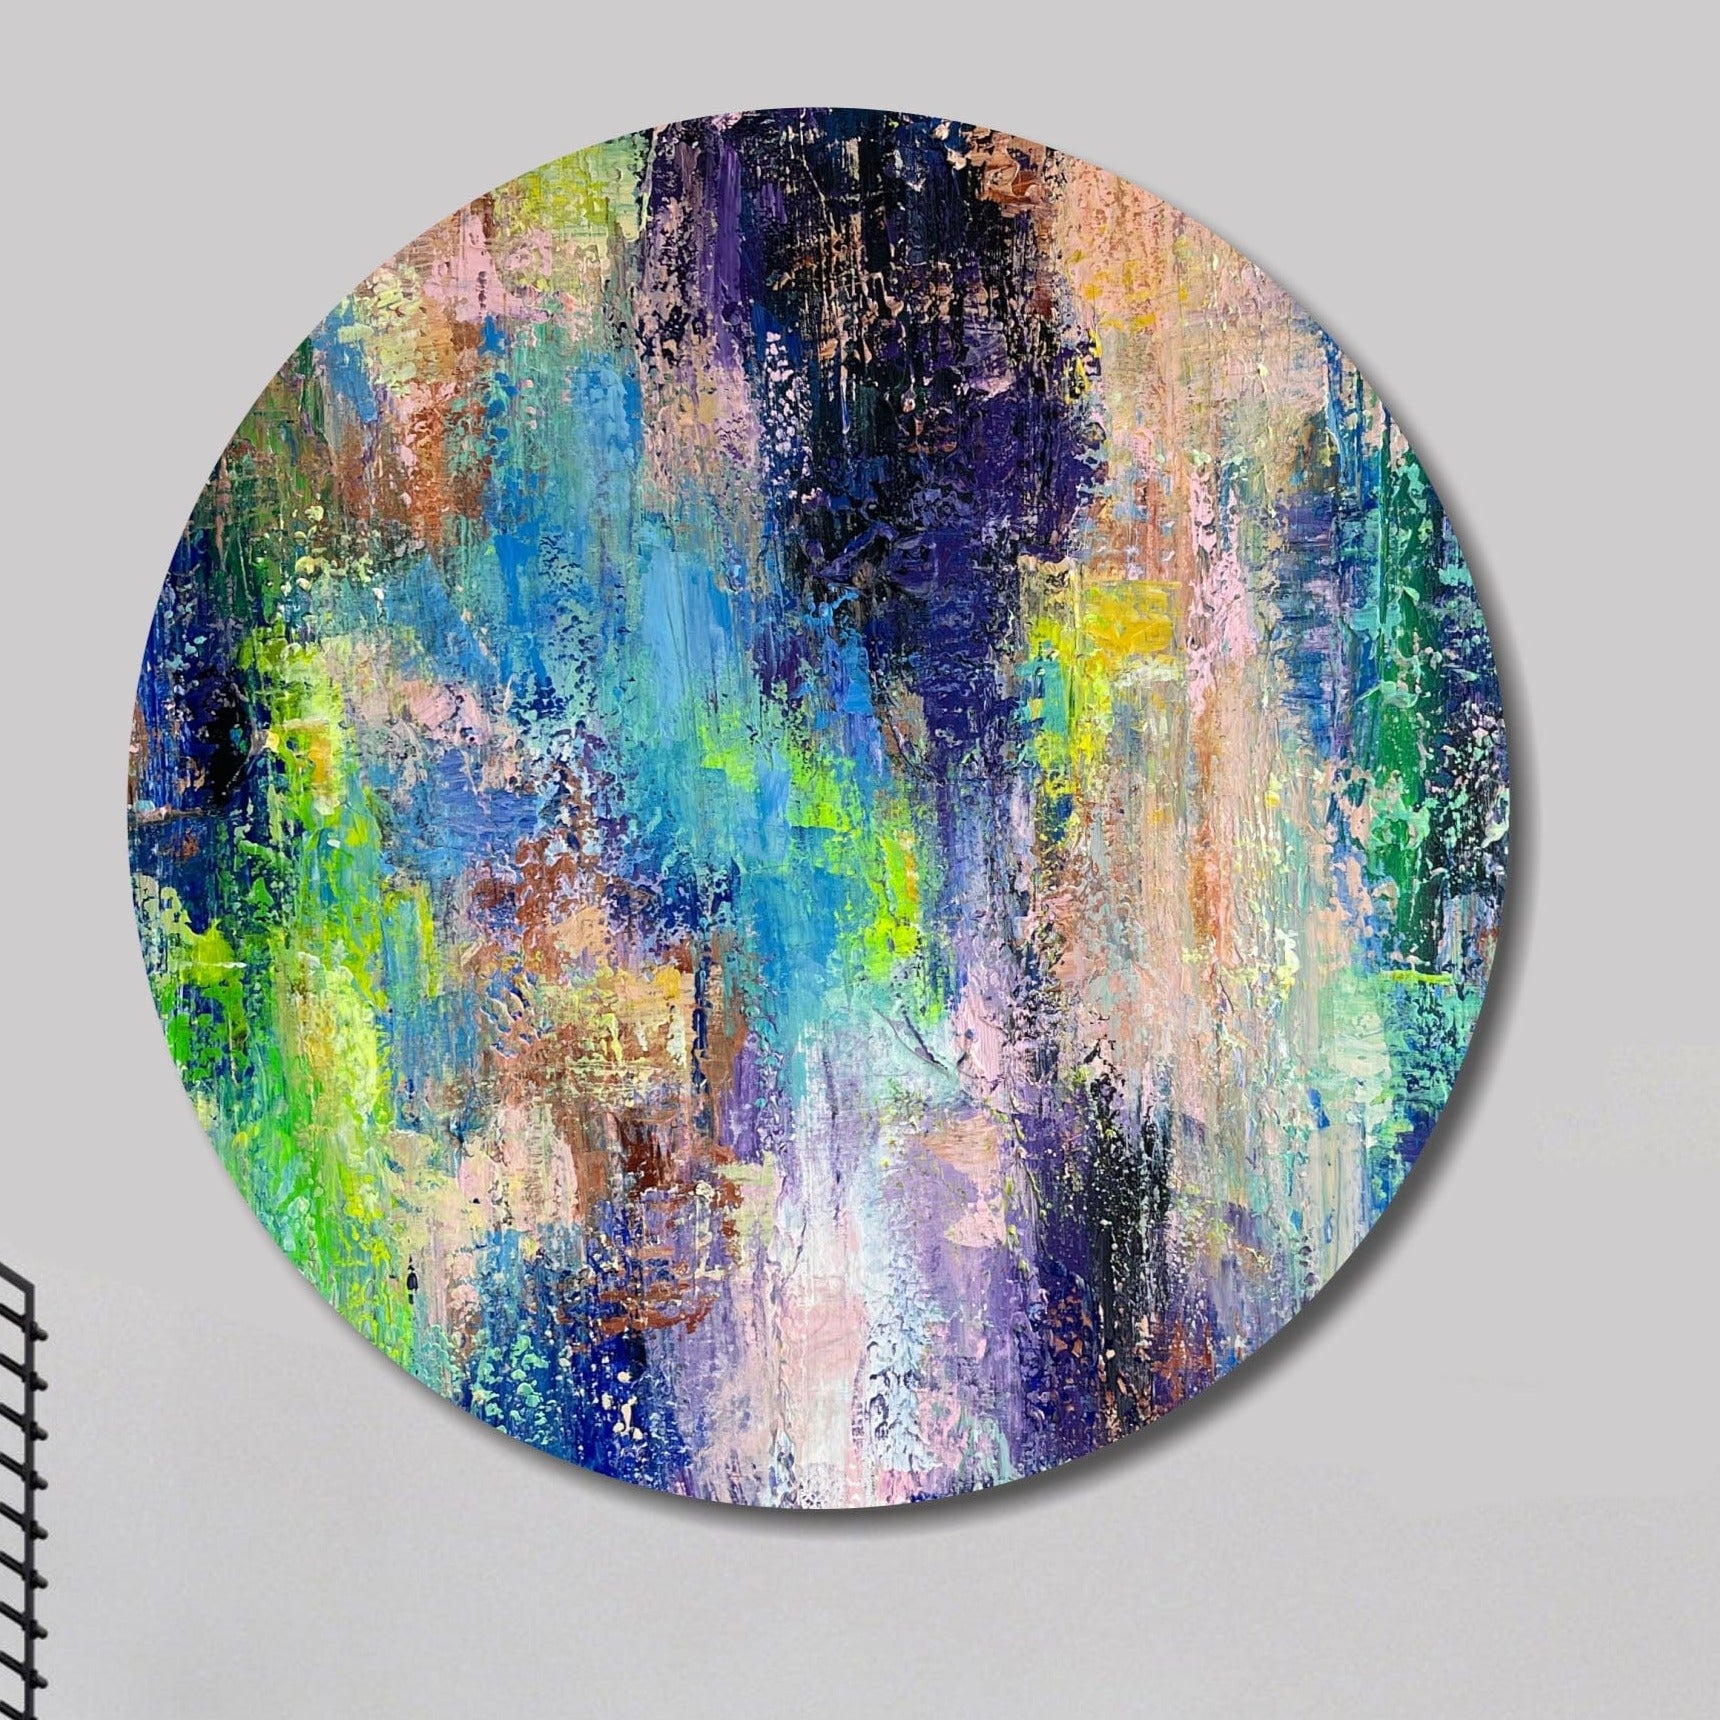 Abstract Colorful Round Painting On Canvas Acrylic Textured Wall Hanging  Decor Hand Painted Art Abstract Decor for Office Decor | COLORFUL MANUAL